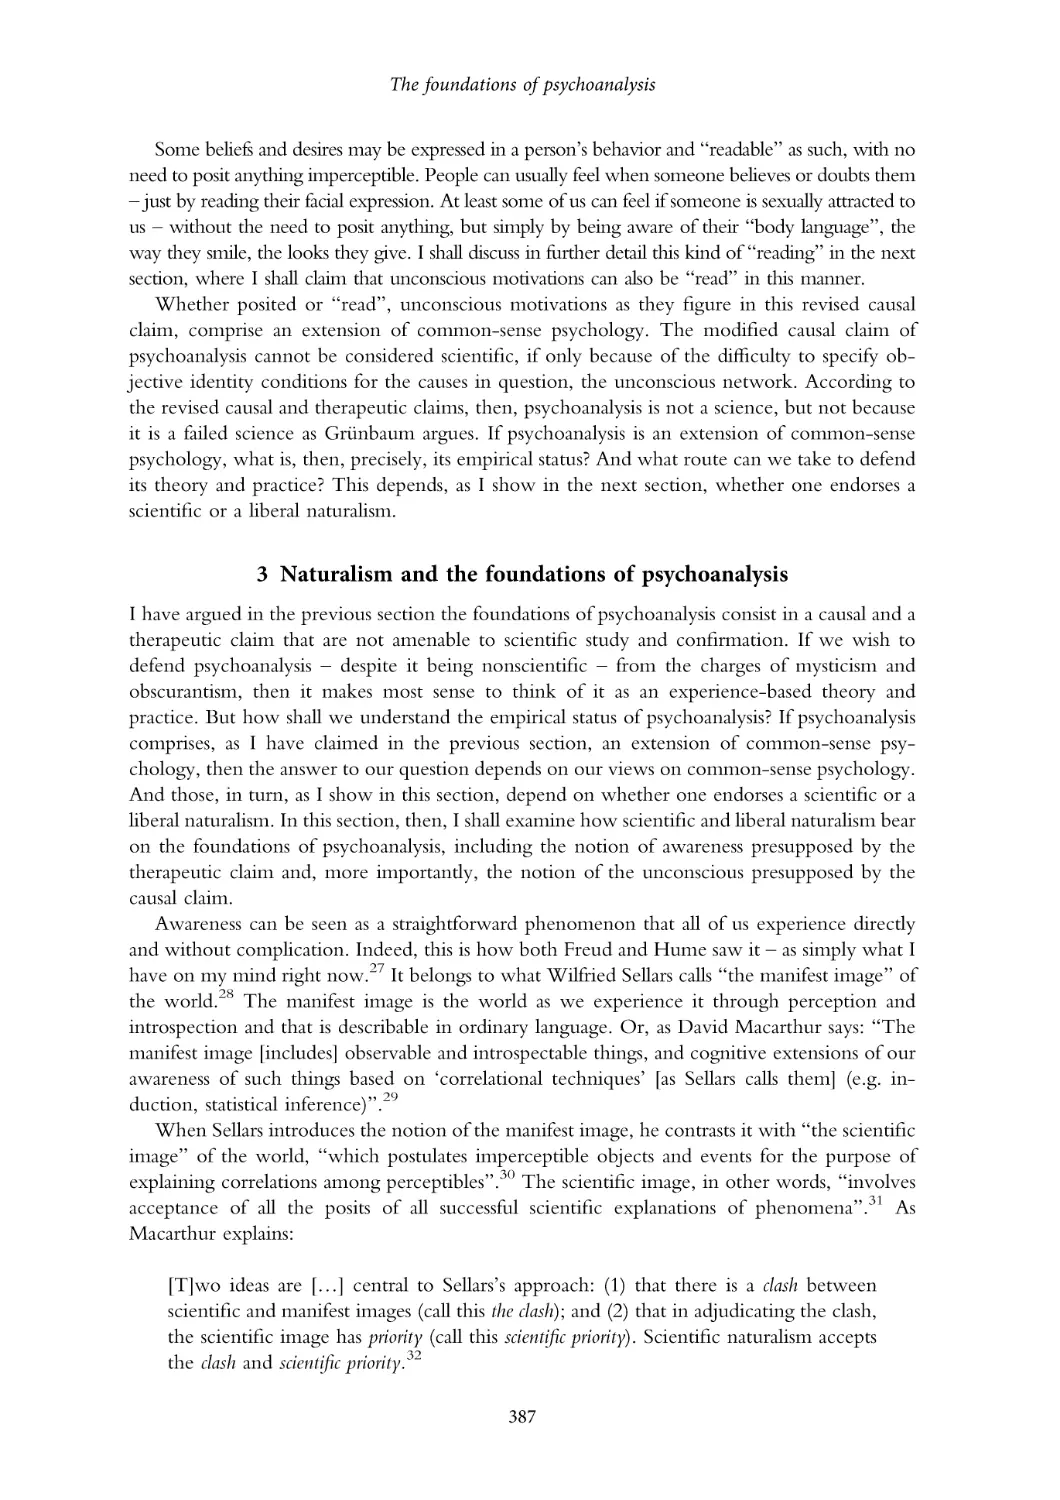 3. Naturalism and the foundations of psychoanalysis